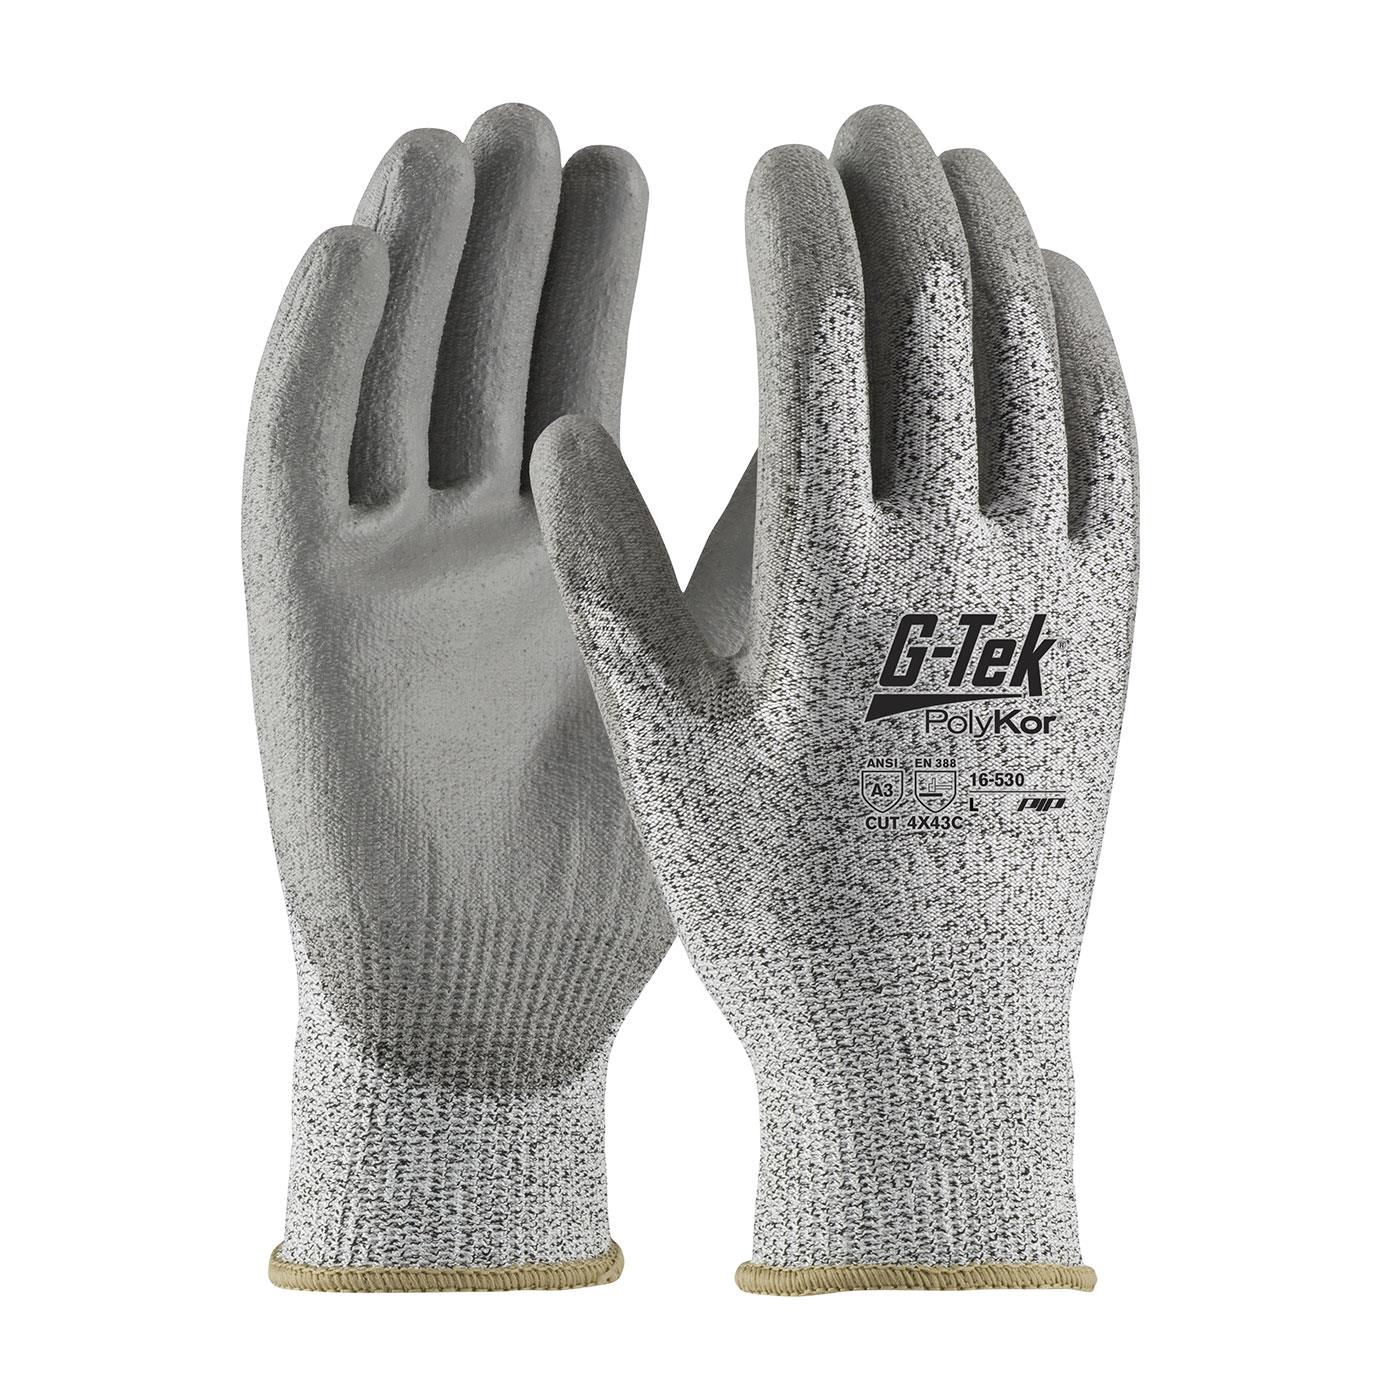 G-TEK POLYKOR 16-530 PU PALM COATED - Tagged Gloves